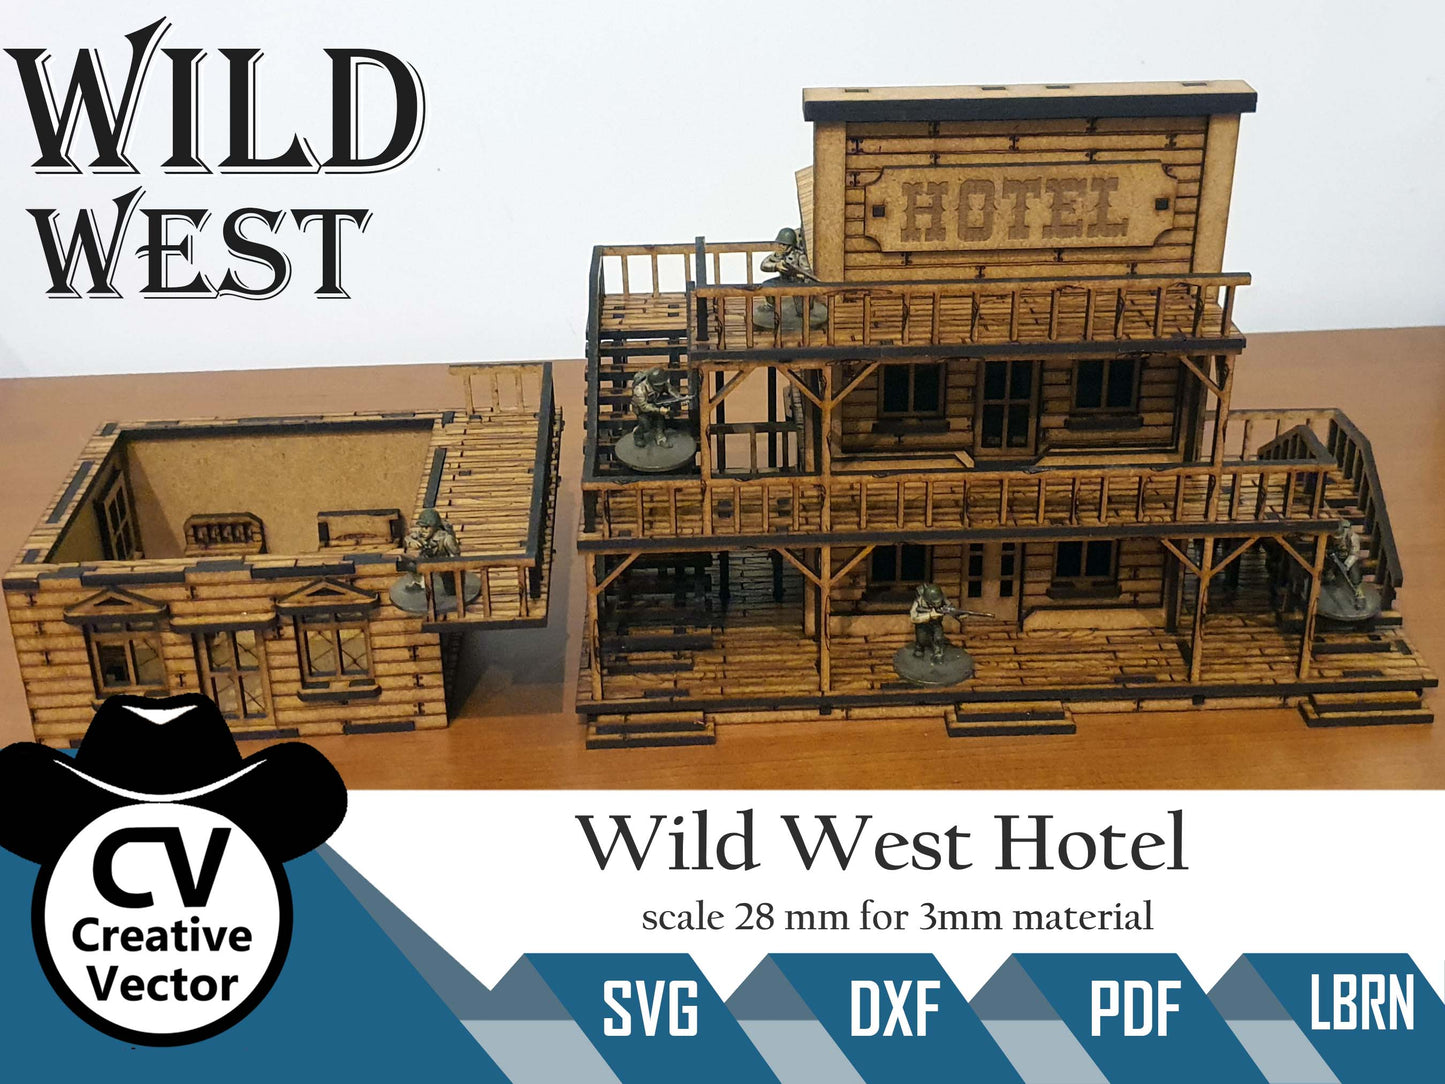 Wild West Hotel in scale 28mm (1:56) for Wargamers